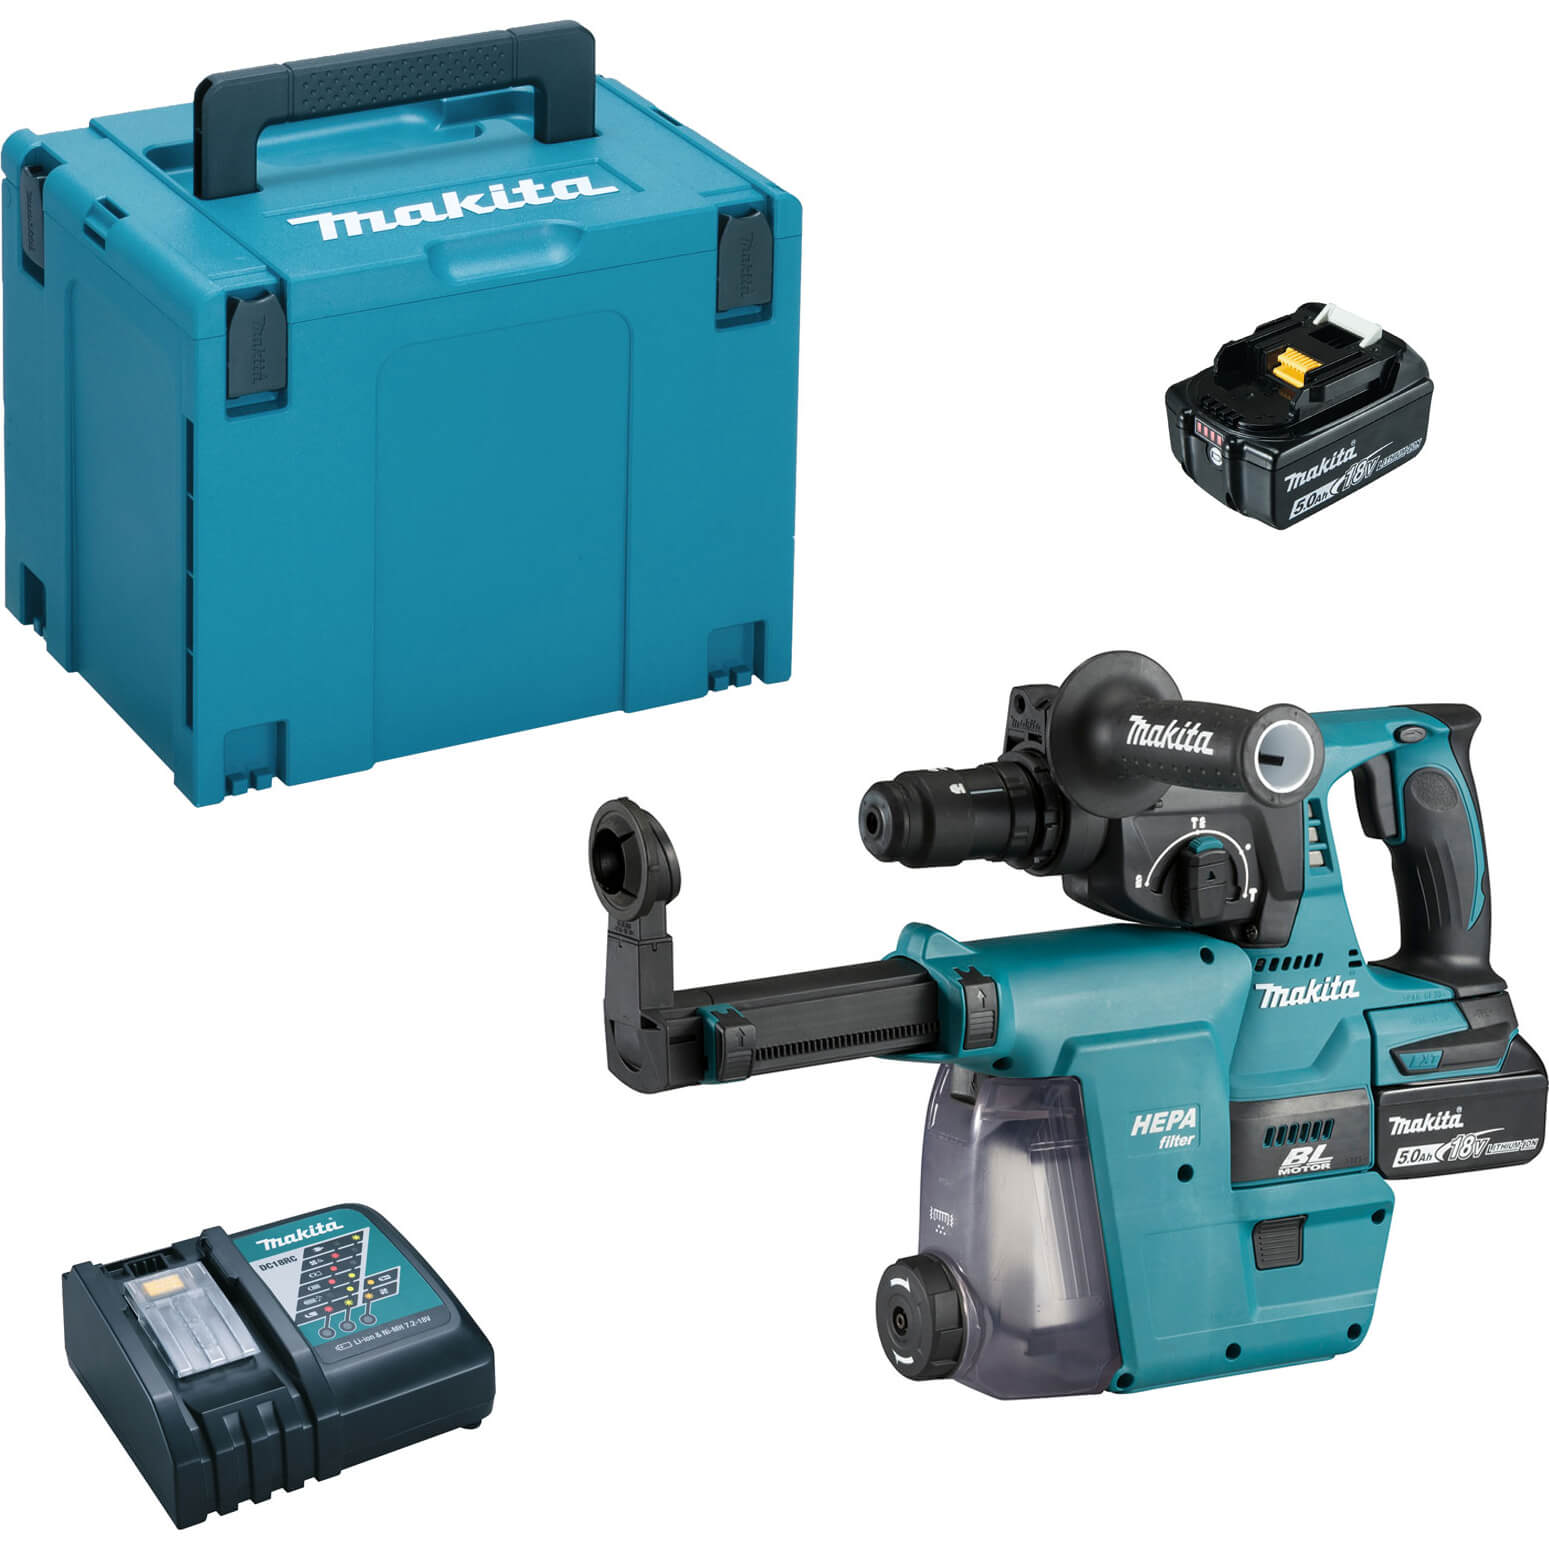 Image of Makita DHR243 18v LXT Cordless SDS Drill and DX07 Dust Attachment 2 x 5ah Li-ion Charger Case